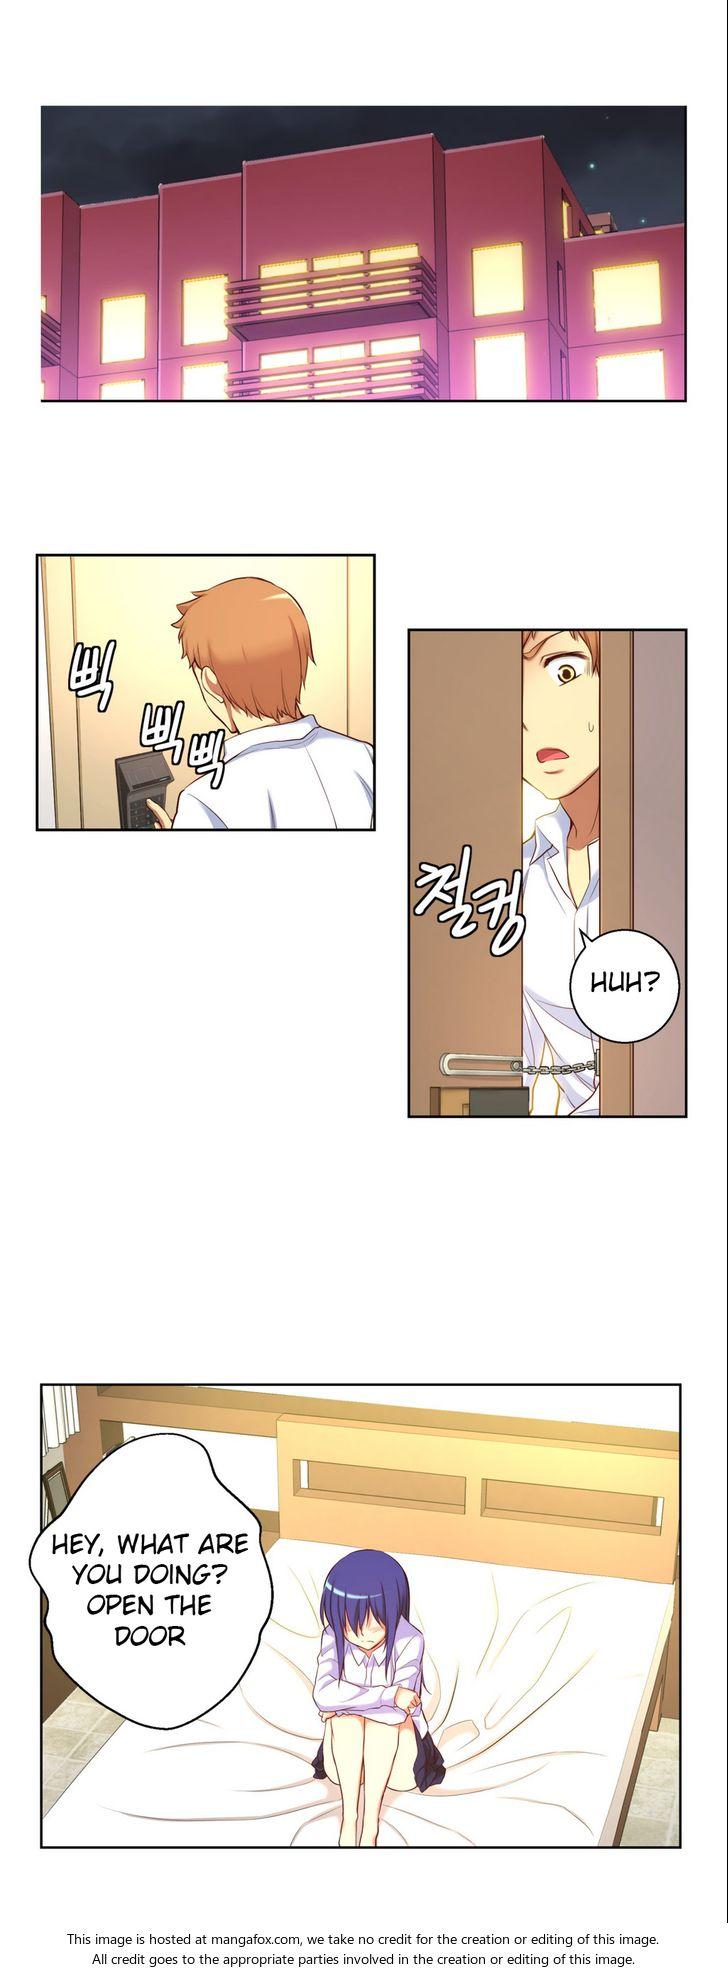 [Donggul Gom] She is Young (English) Part 1/2 318